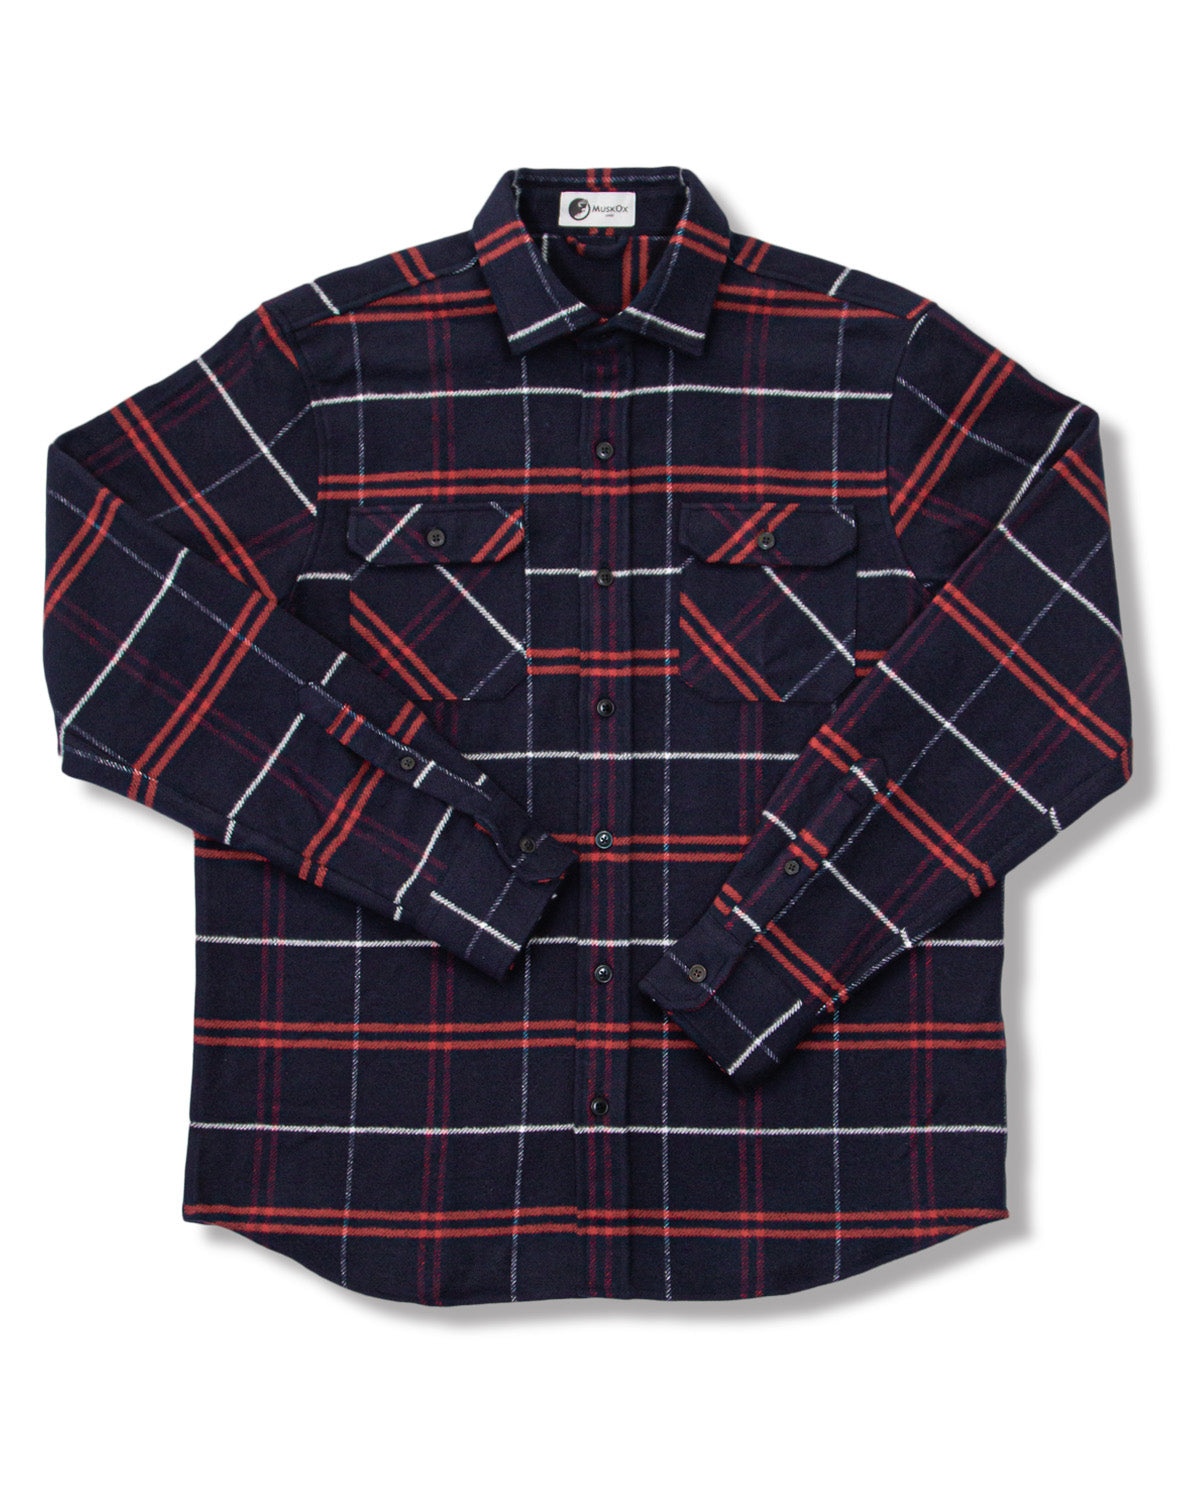 The Grand Flannel, Blue Plaid Heavyweight Cotton Flannel Shirt for